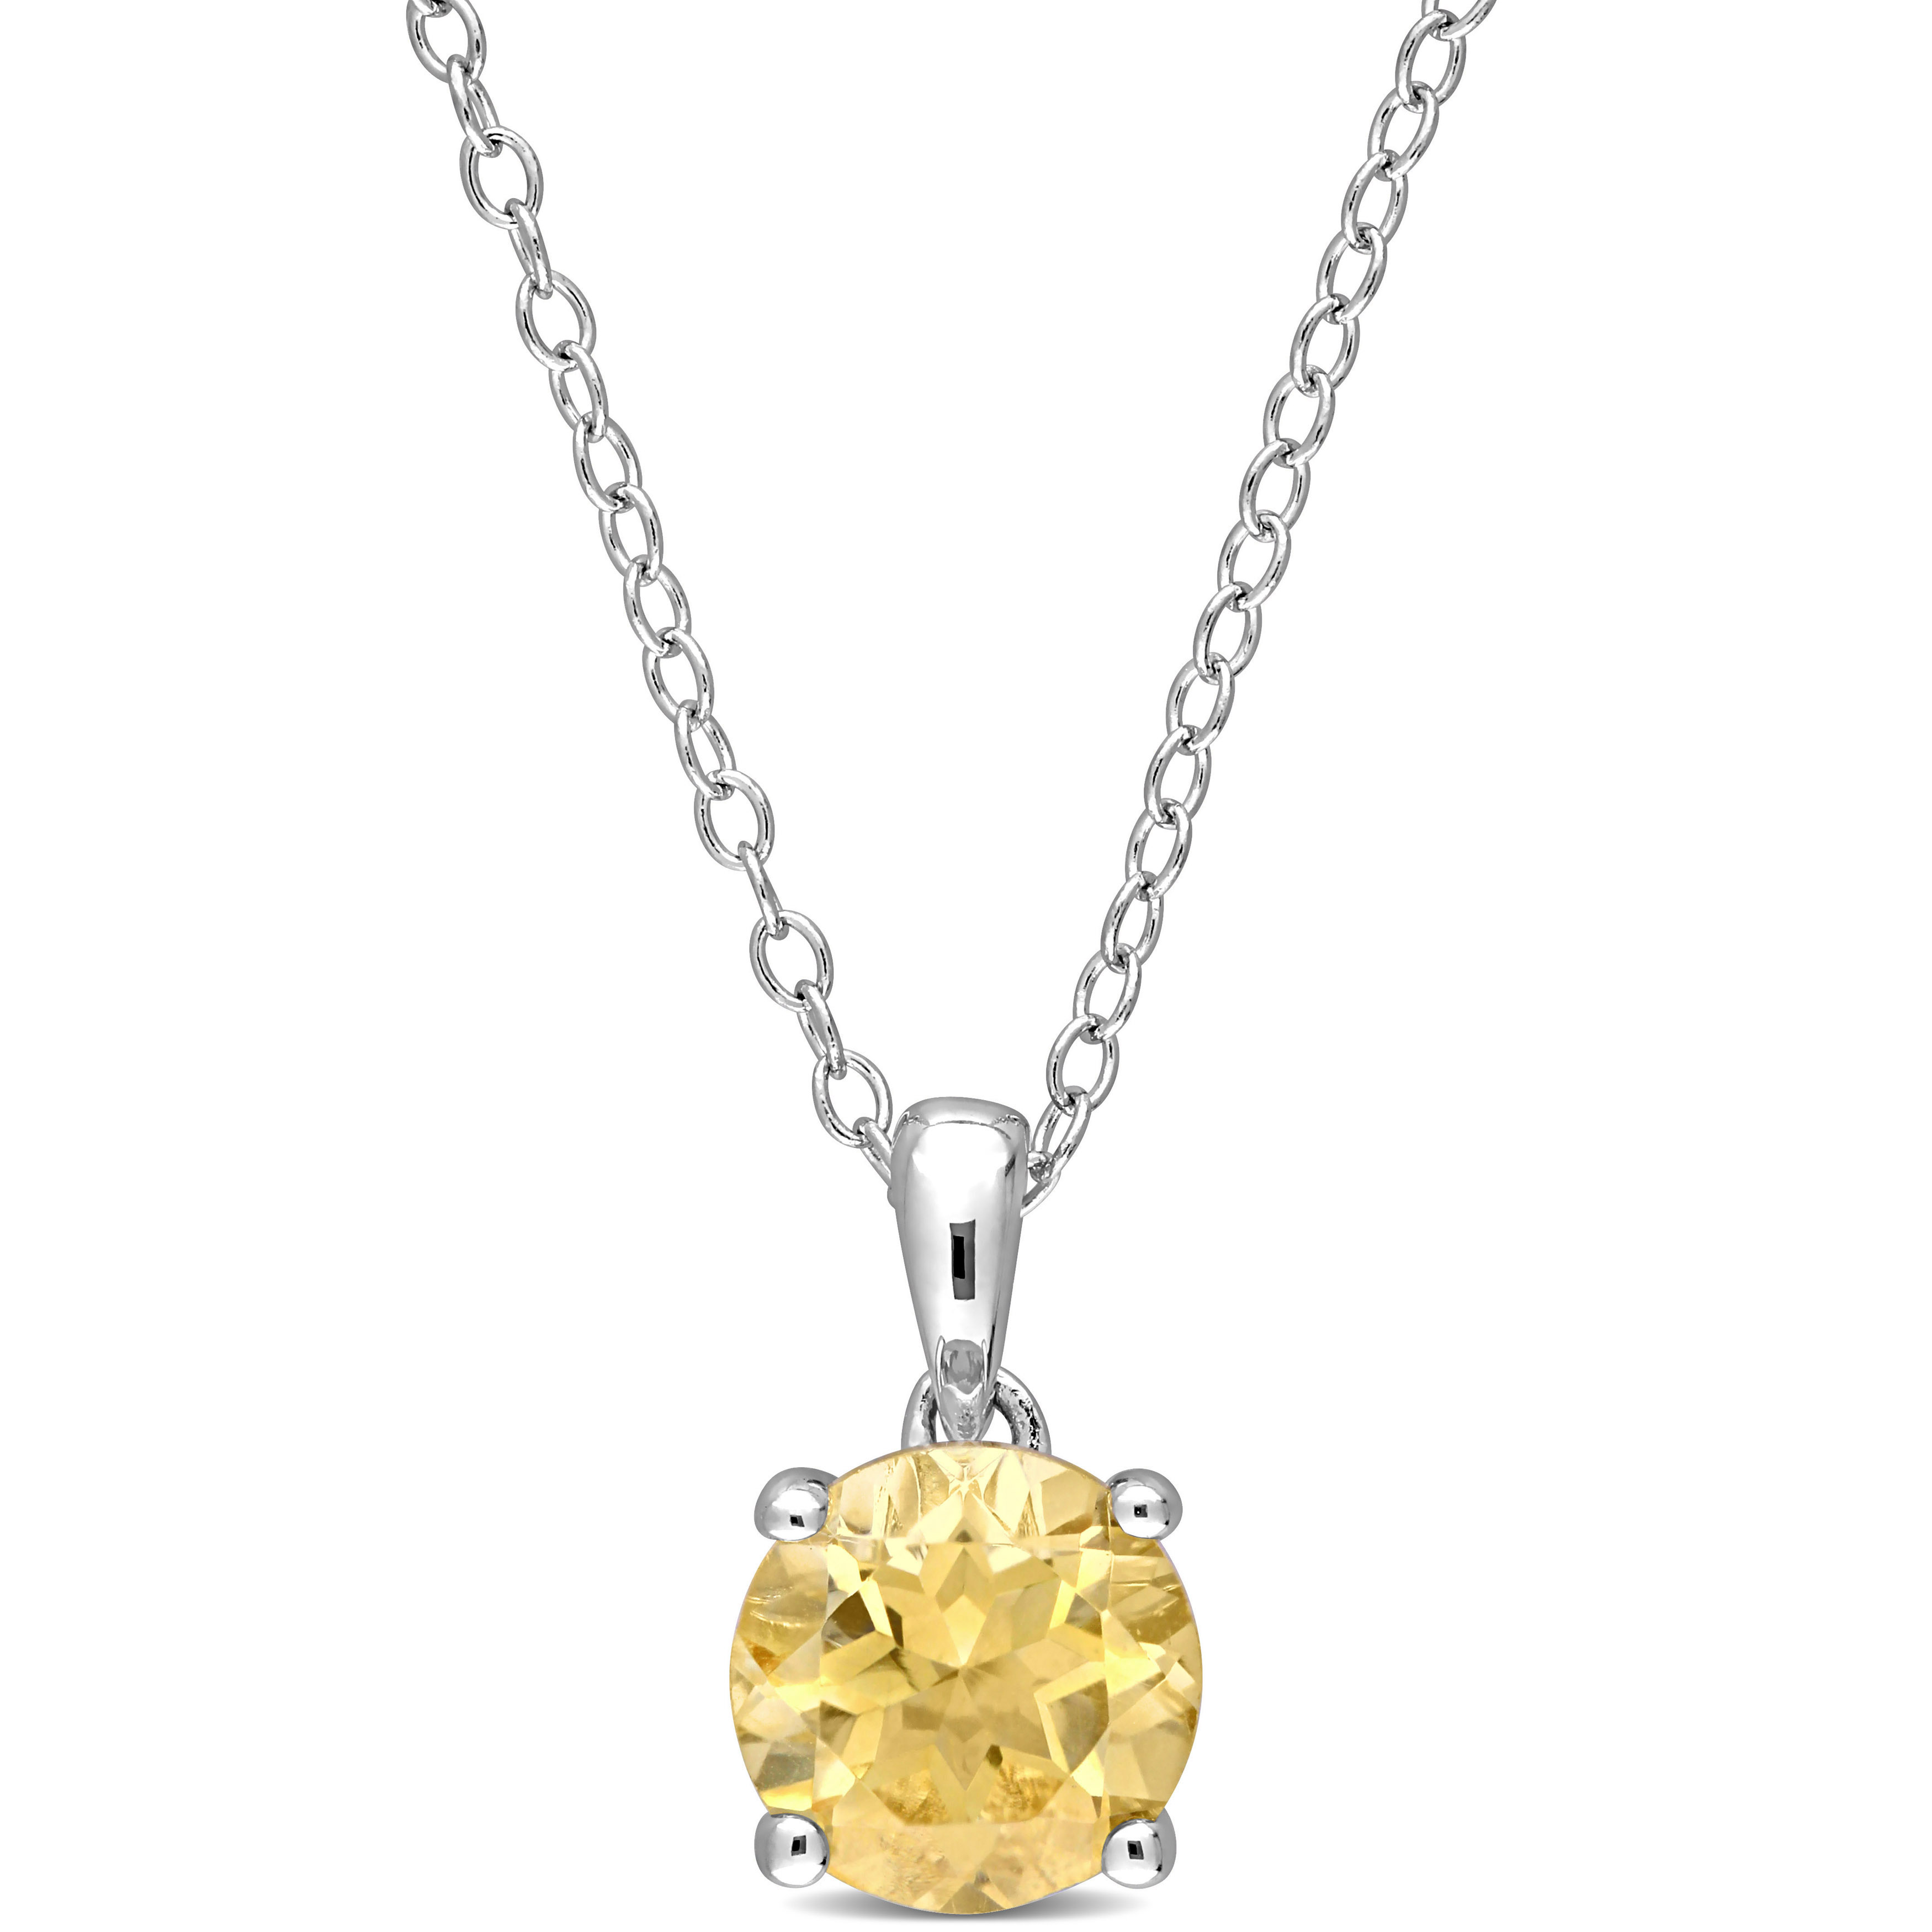 1 1/4 CT TGW Citrine Solitaire Pendant with Chain in Sterling Silver